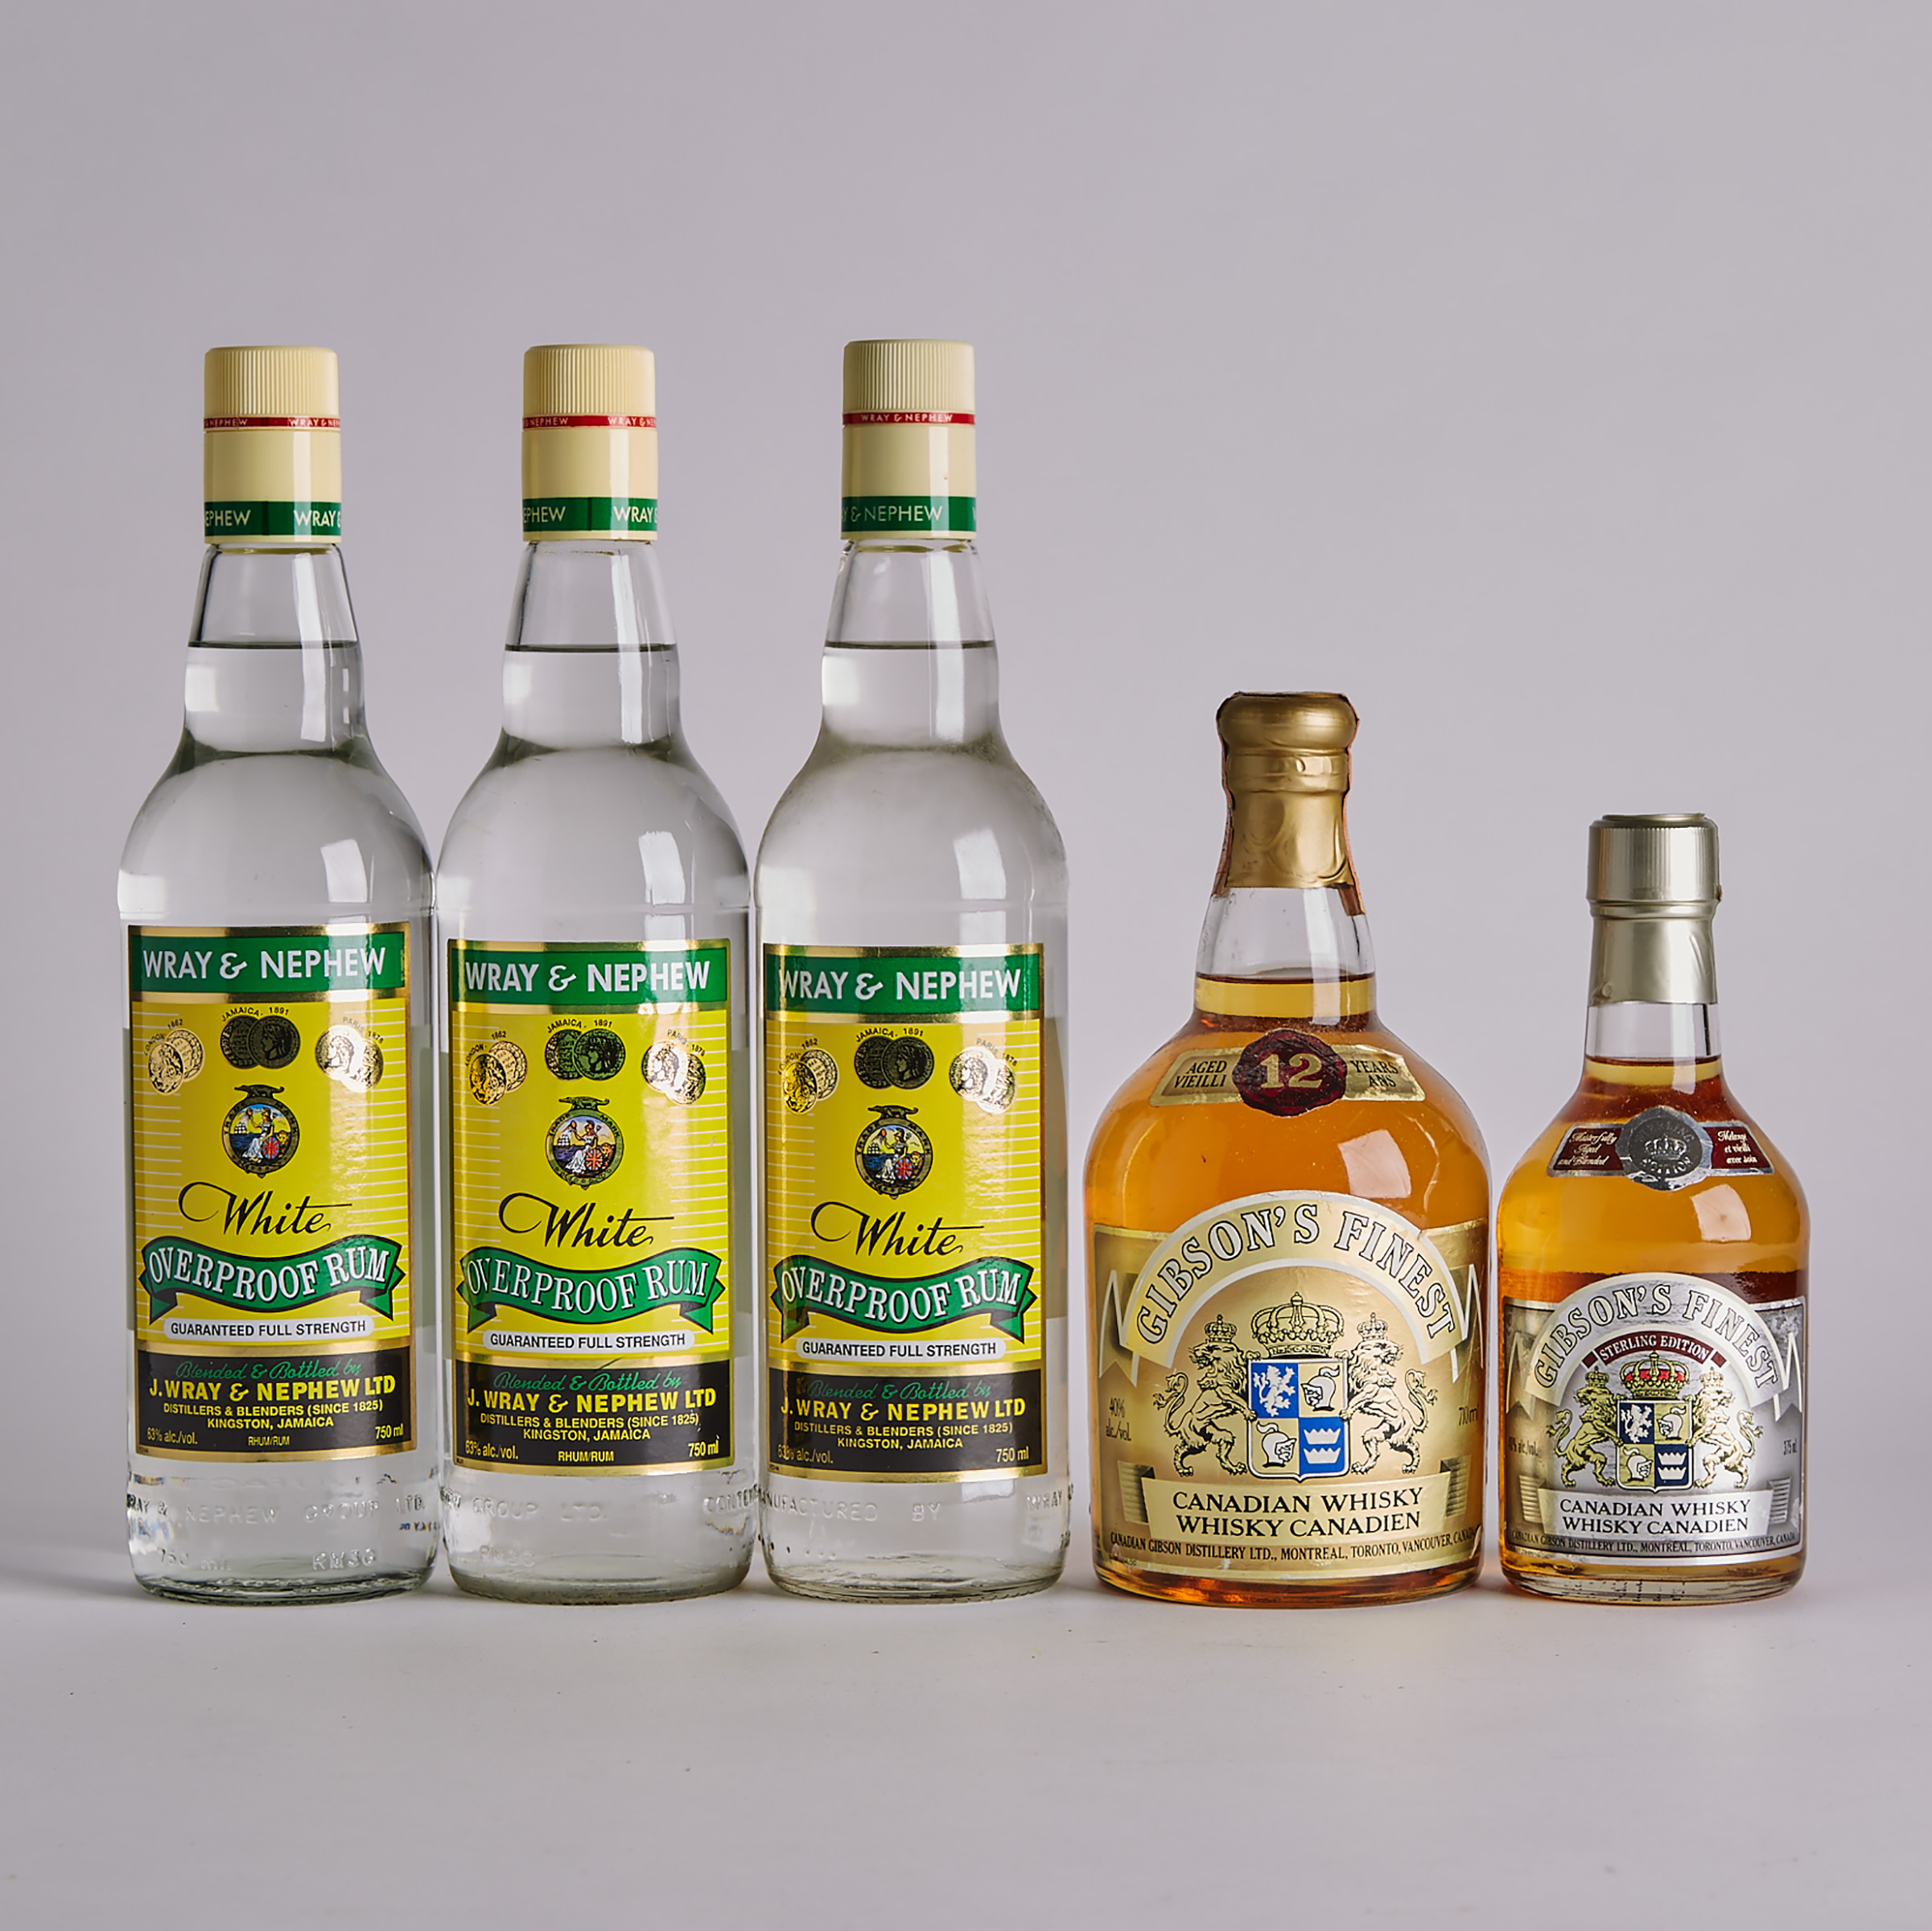 GIBSON'S FINEST CANADIAN WHISKY (ONE 375 ML)
GIBSON'S FINEST CANADIAN WHISKY 12 YRS (ONE 710 ML)
WRAY & NEPHEW WHITE OVERPROOF RUM (ONE 750 ML)
WRAY & NEPHEW WHITE OVERPROOF RUM (ONE 750 ML)
WRAY & NEPHEW WHITE OVERPROOF RUM (ONE 750 ML)